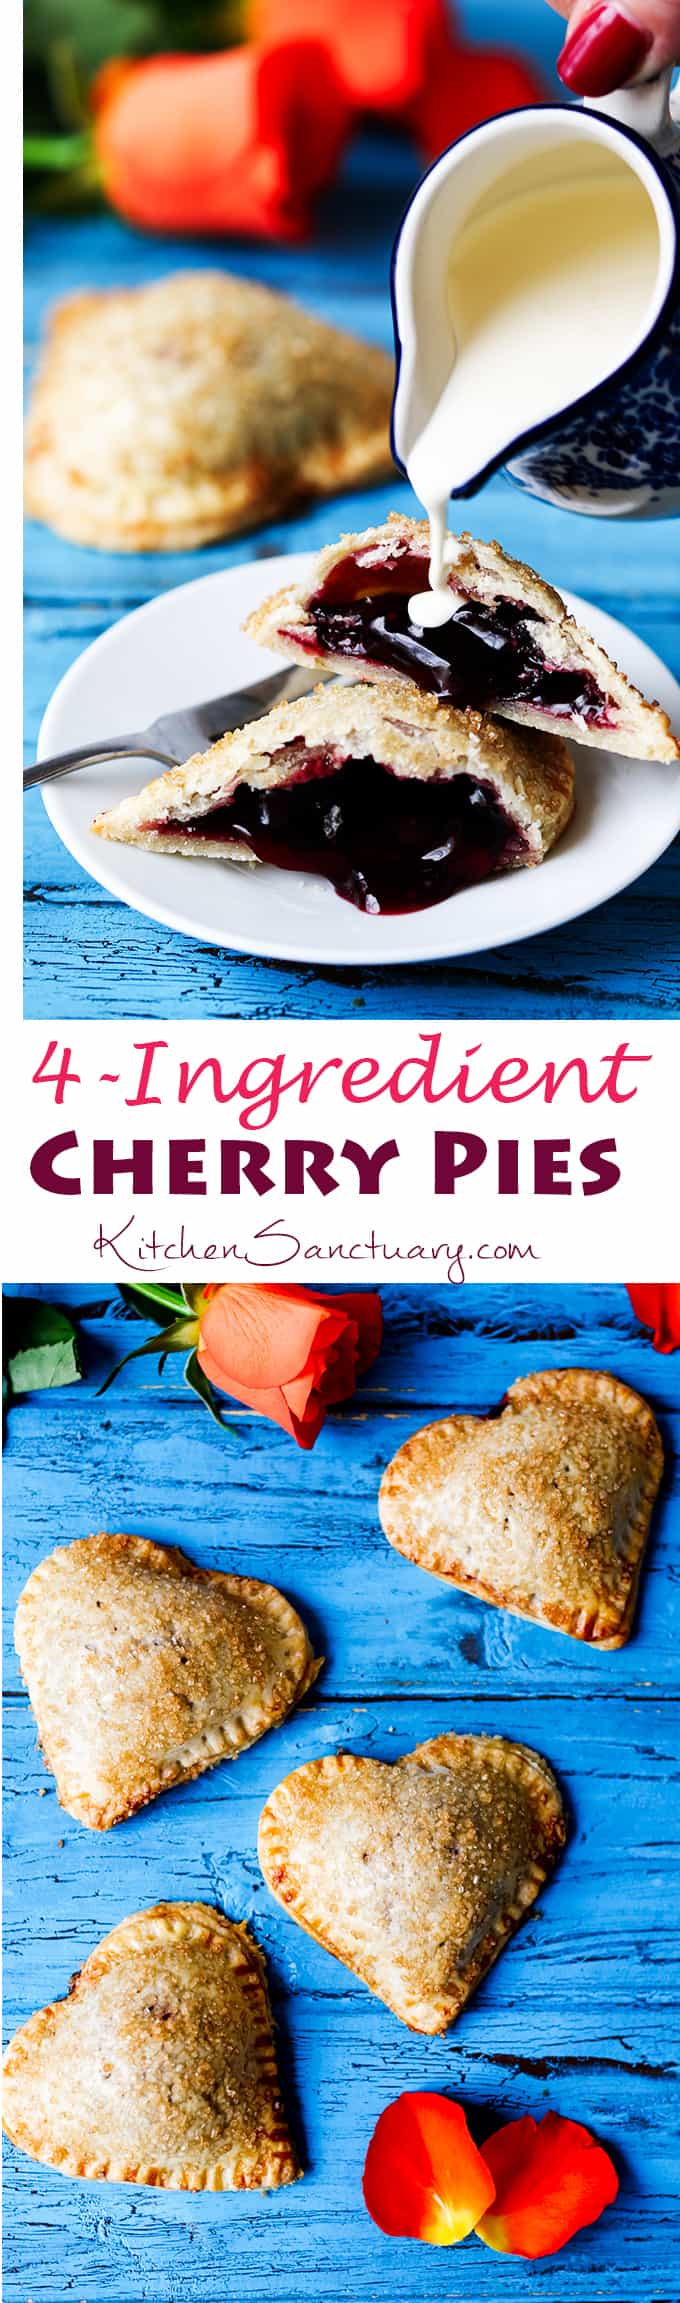 Simple sugar-sprinkled cherry hand pies - a simple but thoughtful gift for your Valentine.